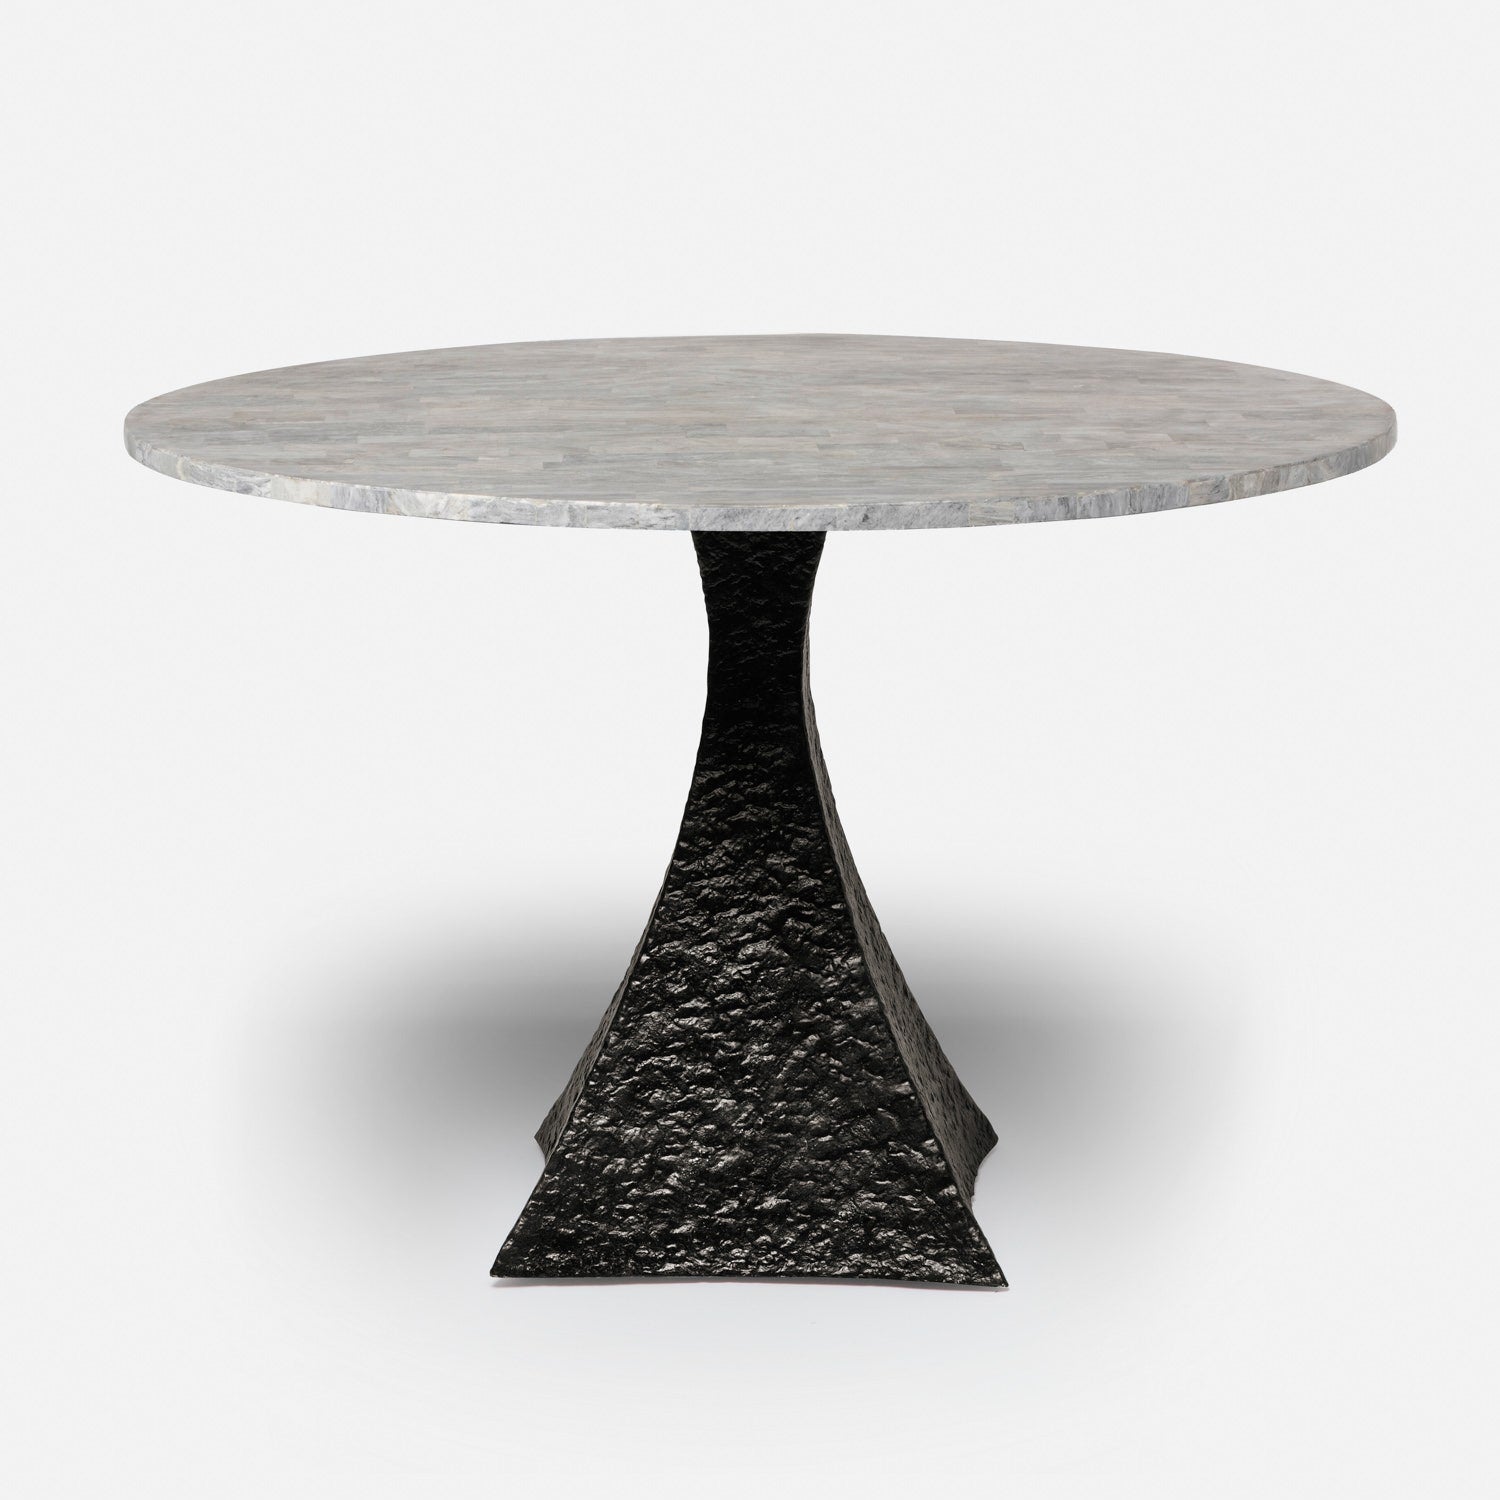 Made Goods Noor 48" x 30" Bumpy Black Iron Dinning Table With Round Gray Romblon Stone Table Top